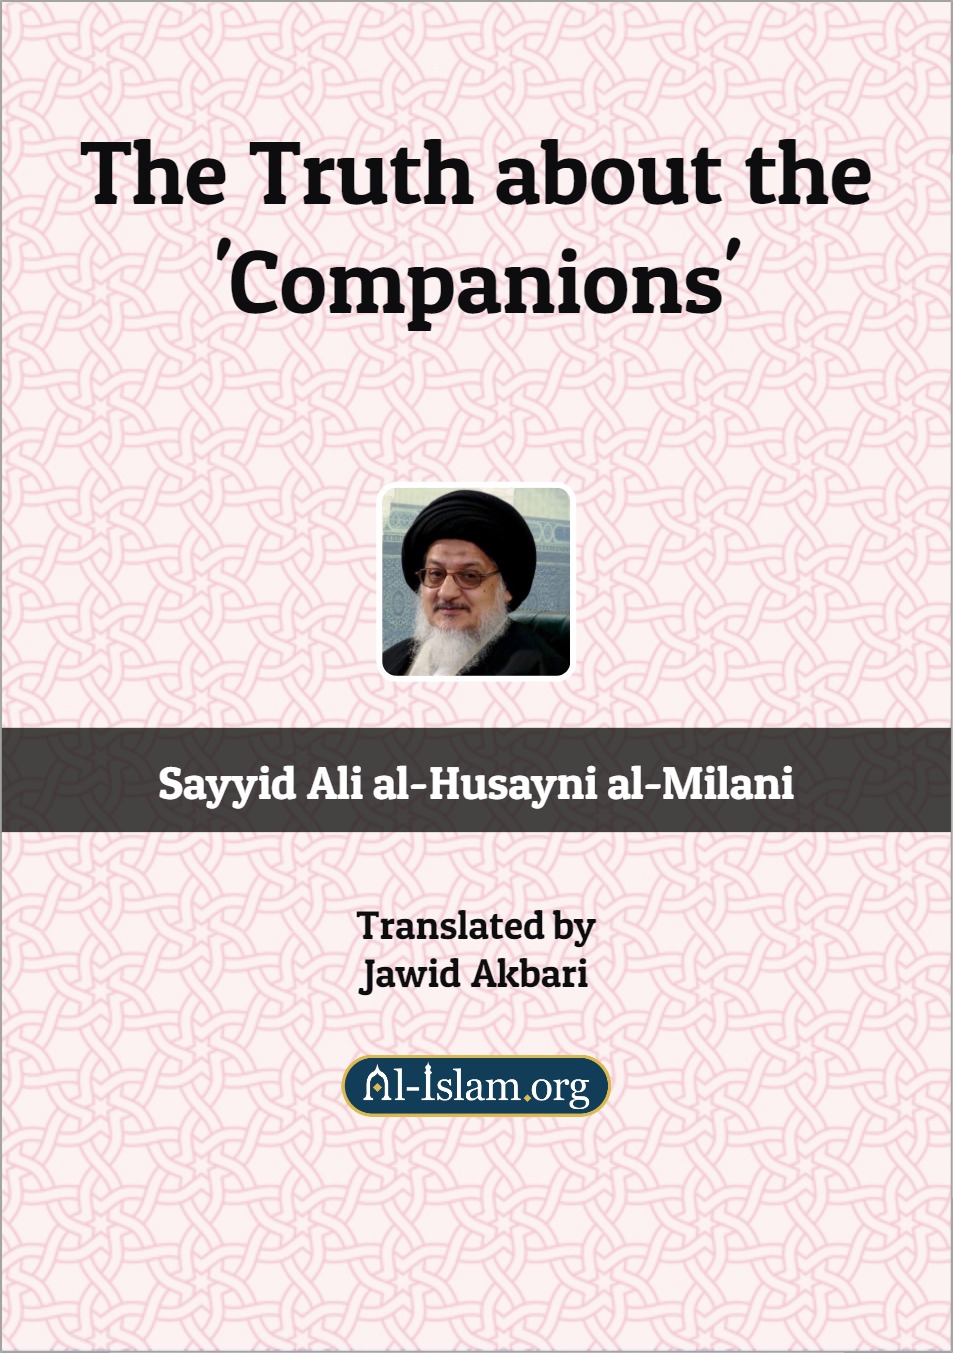 The book of truth about companions